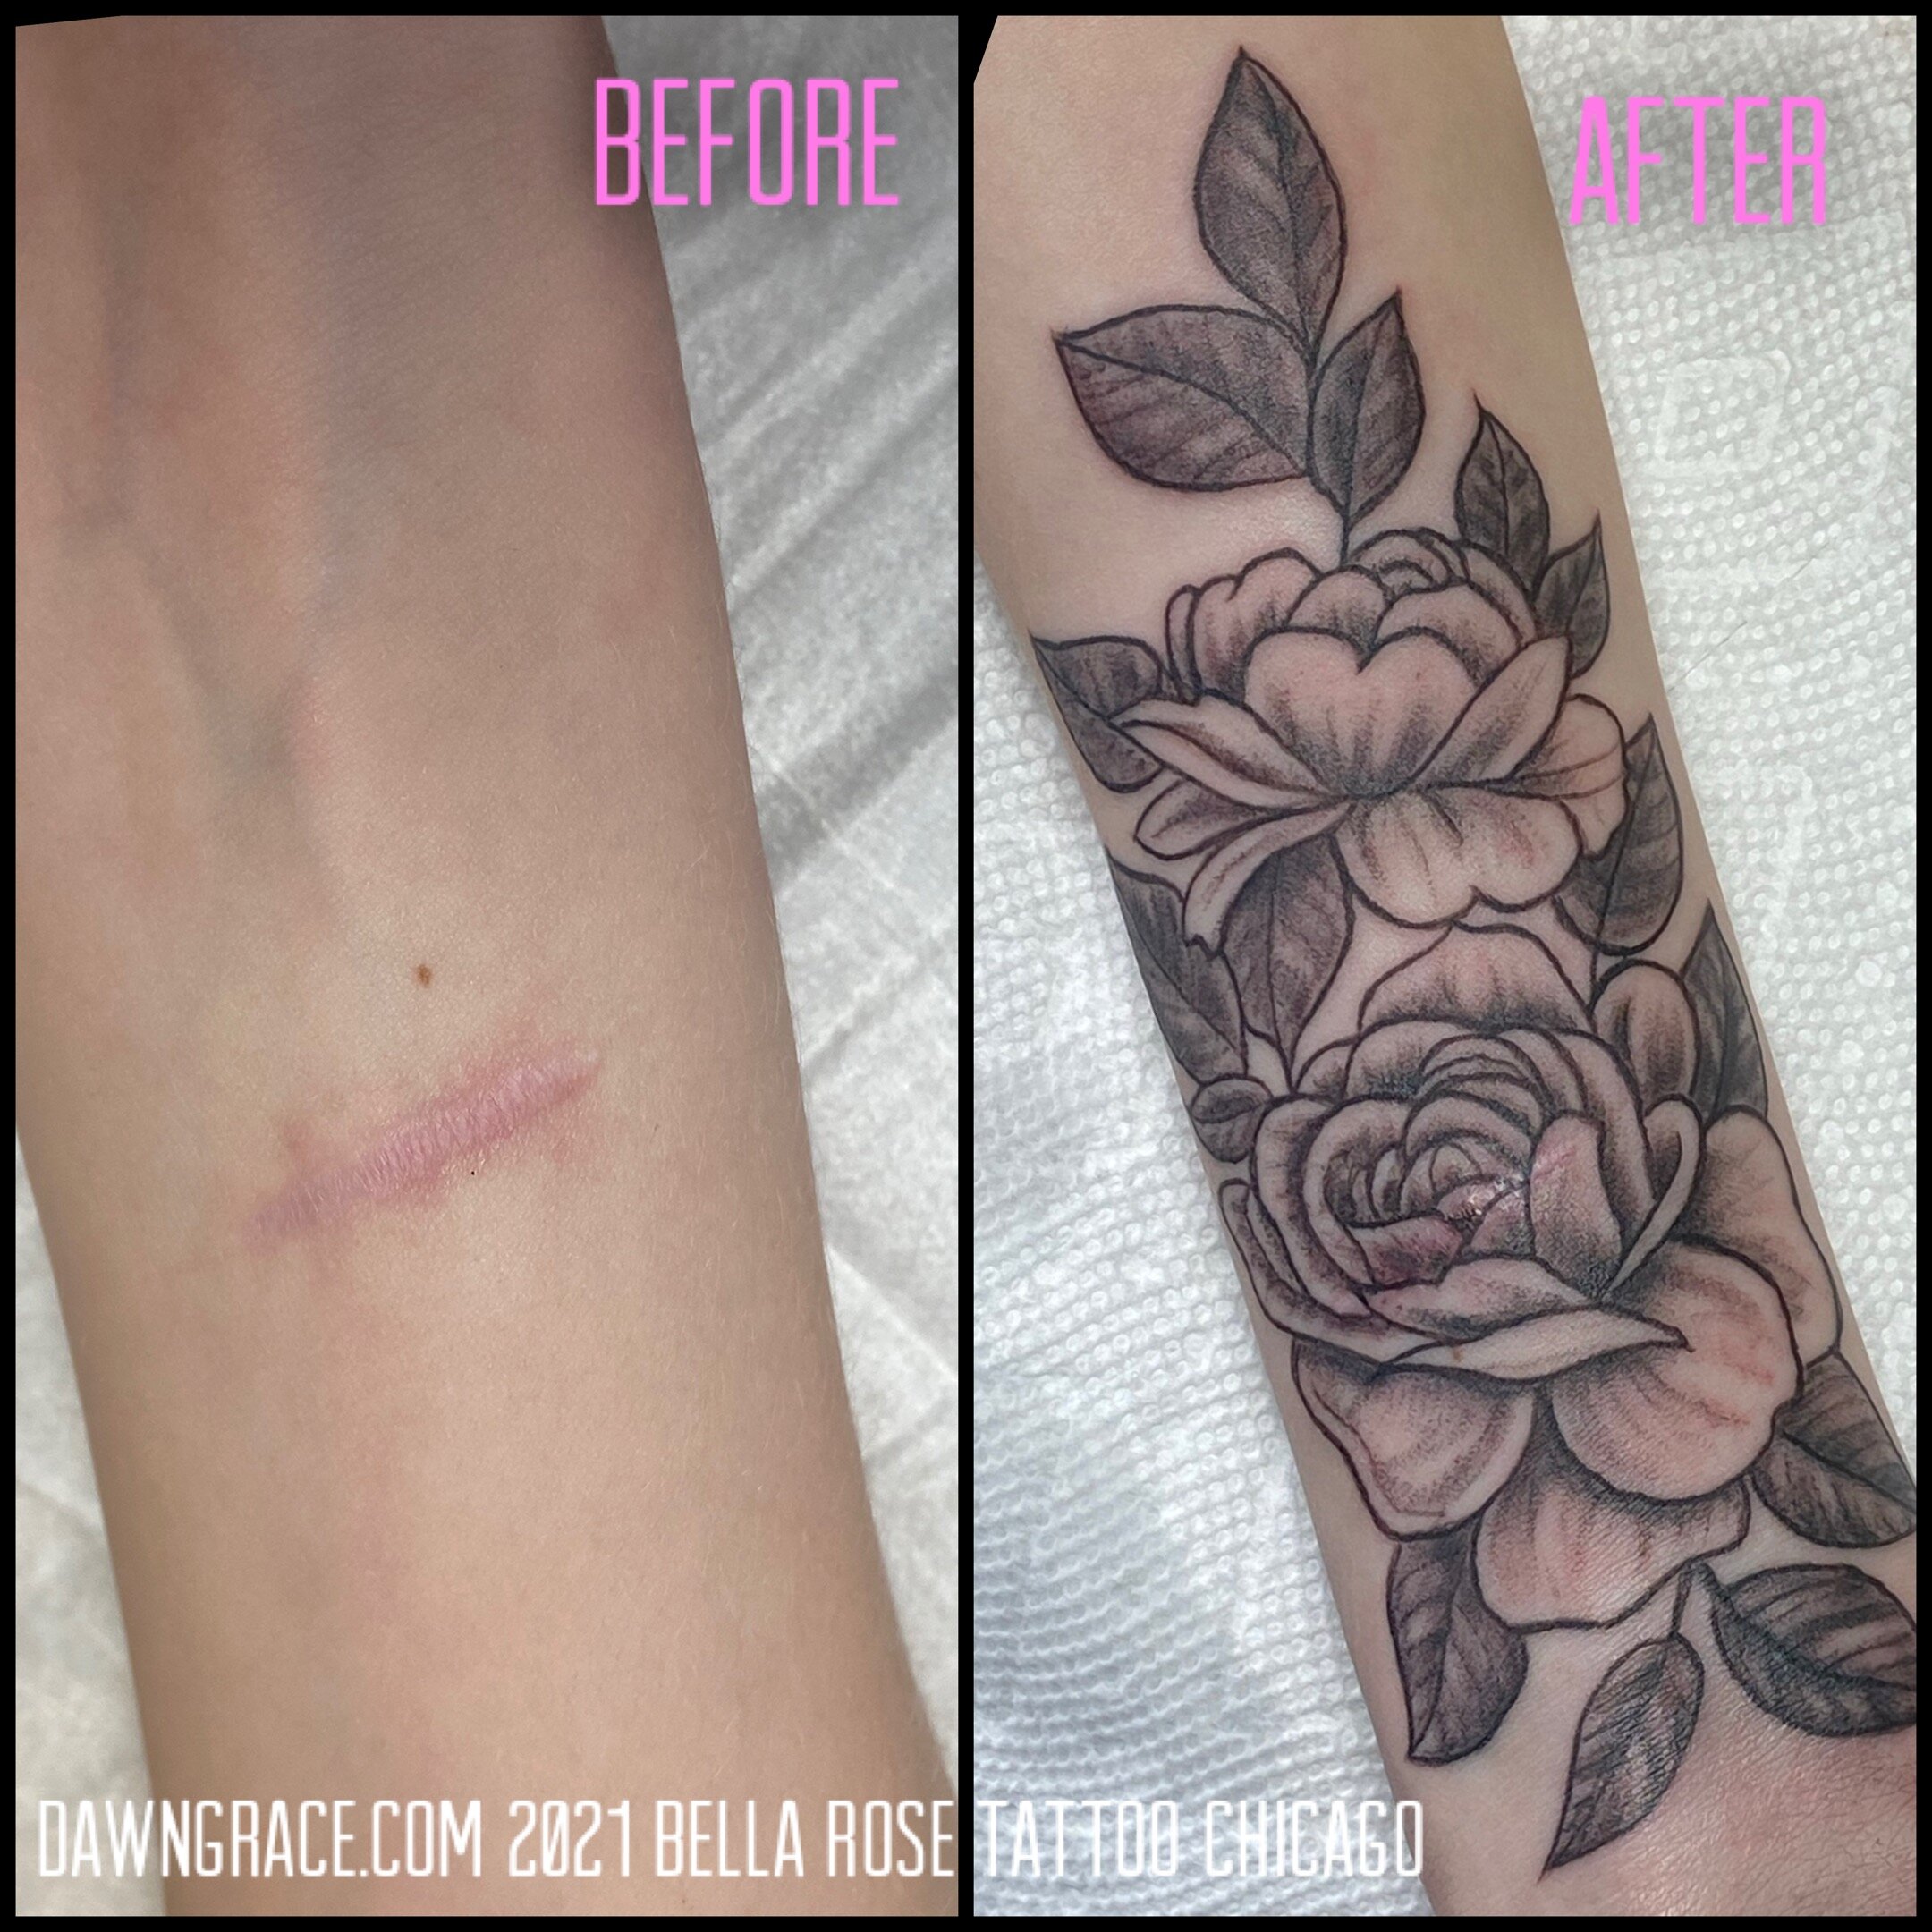 Amazing Scar Cover Up Tattoos That Will Blow You Away